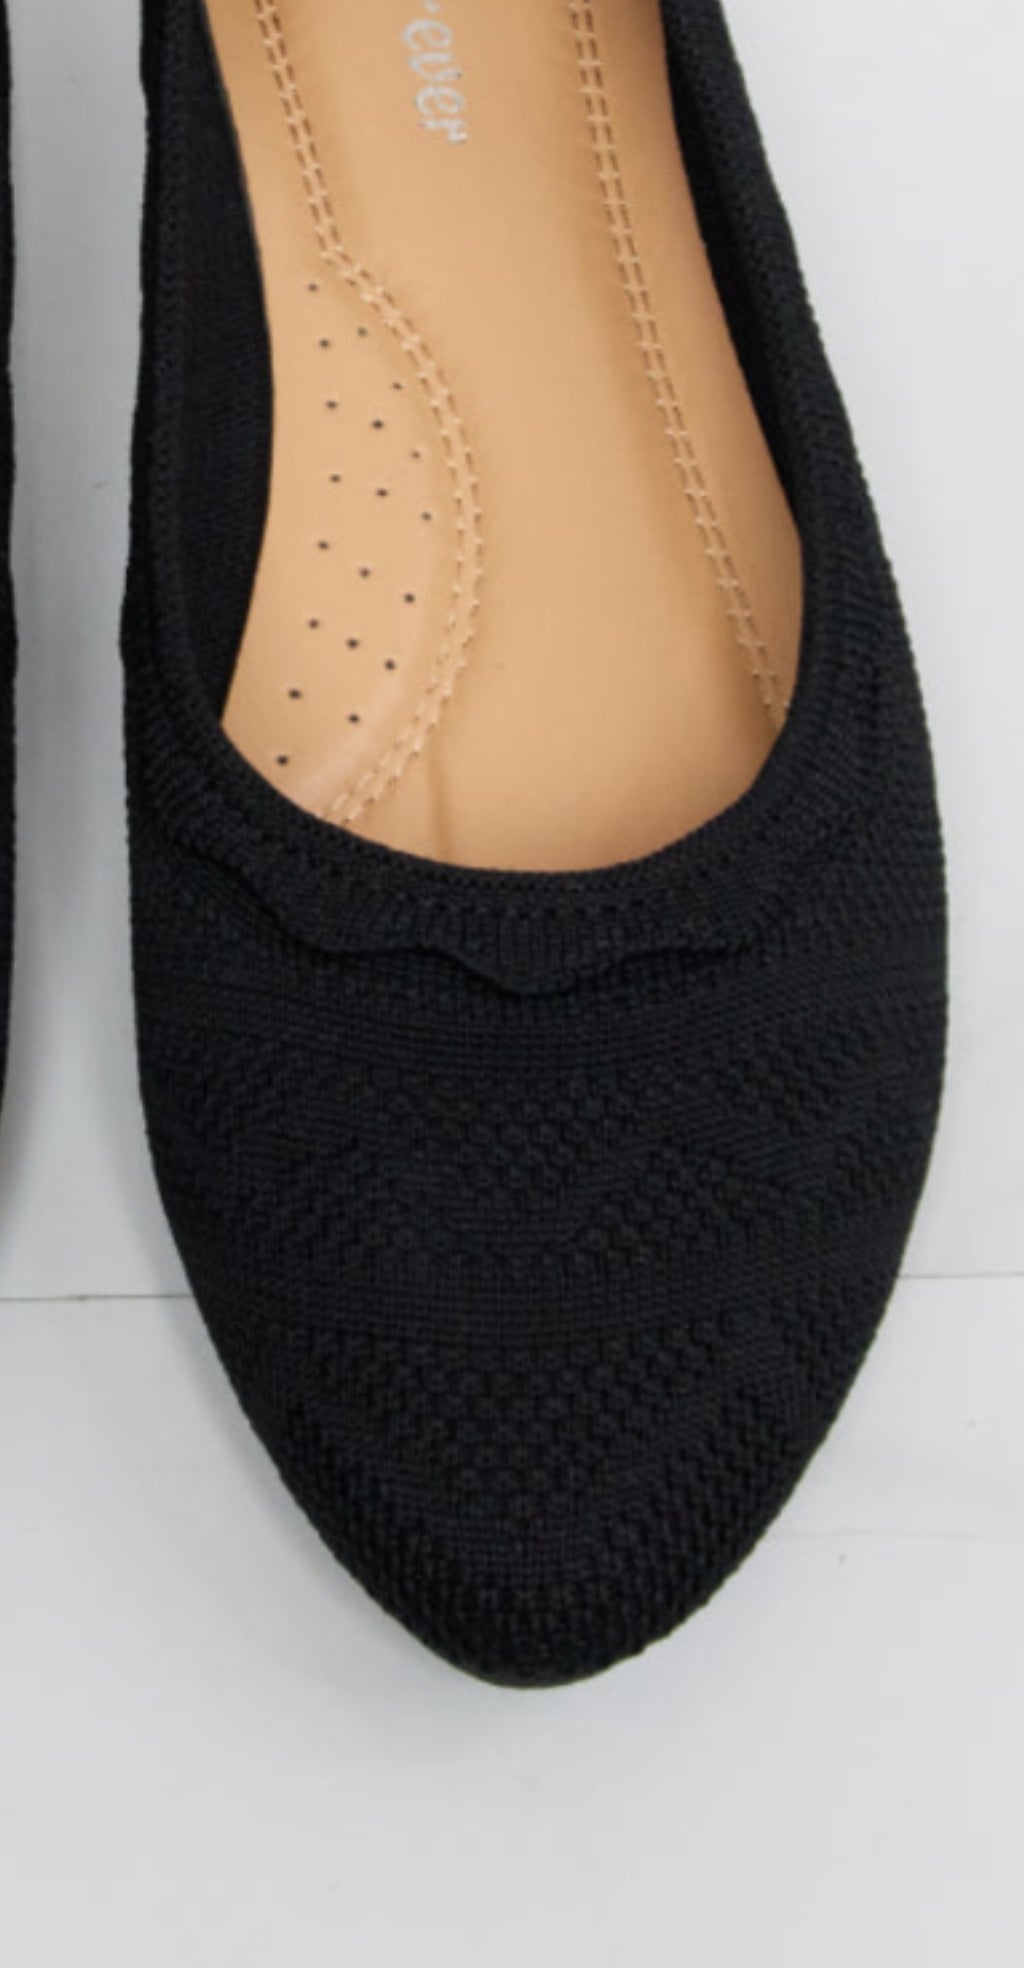 Take Your Time Scalloped Trim Flats in Black